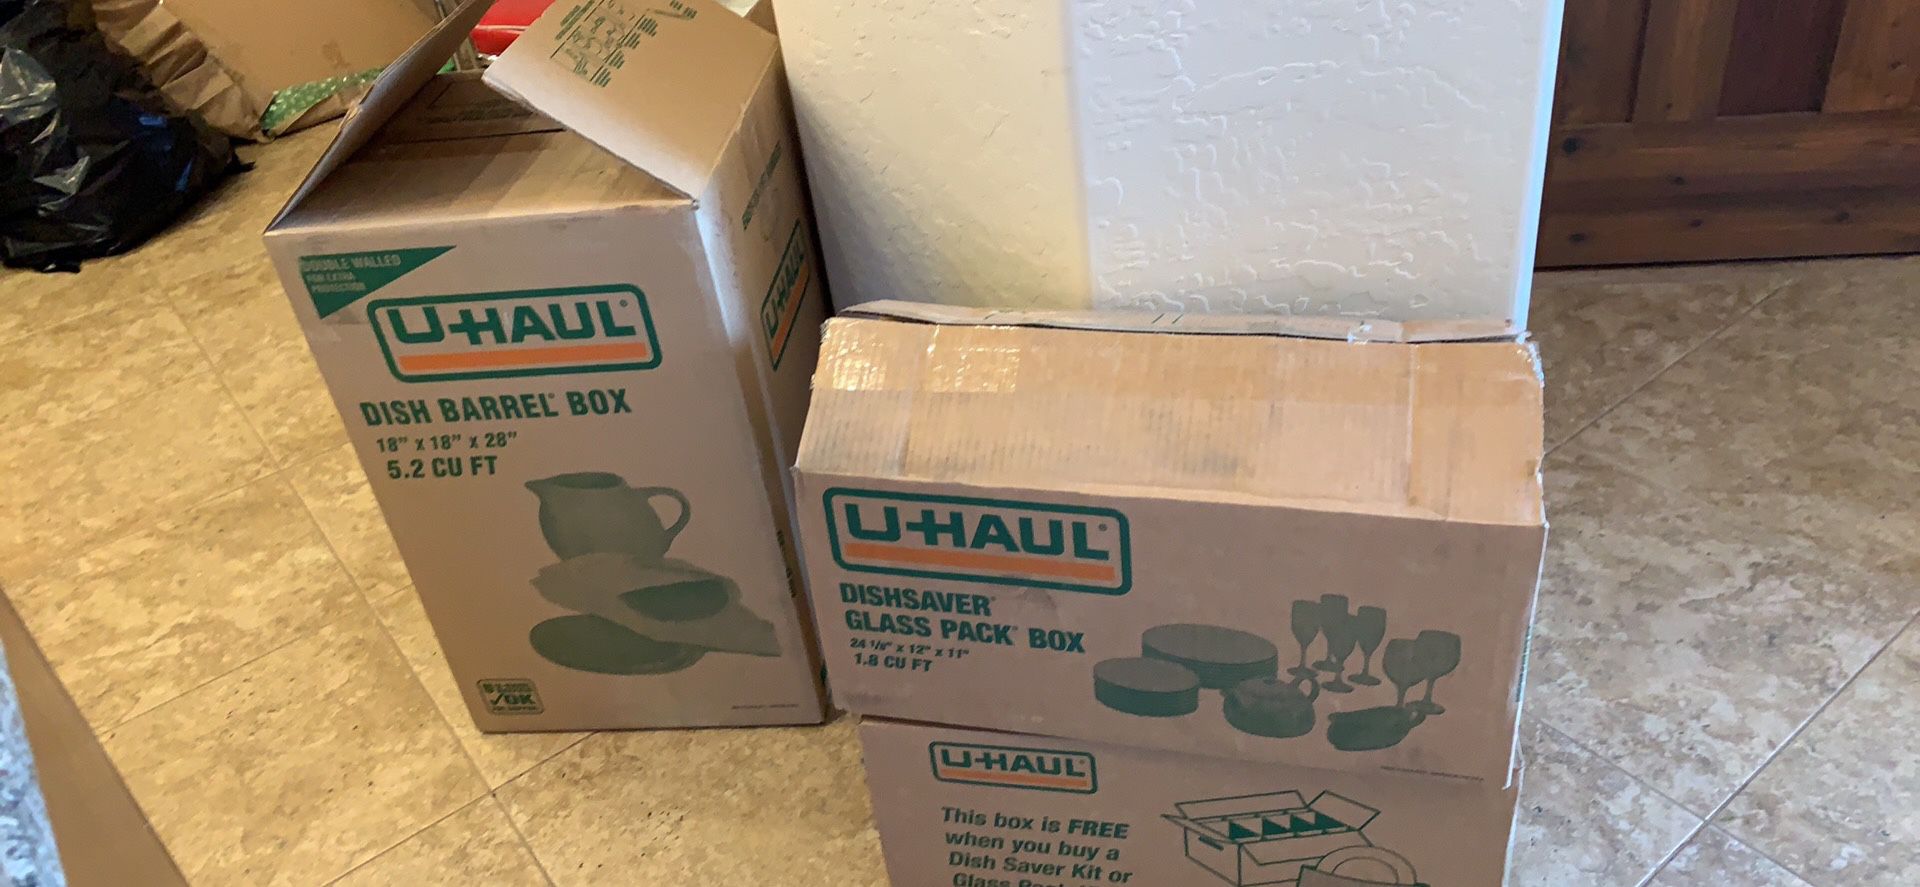 Moving boxes free